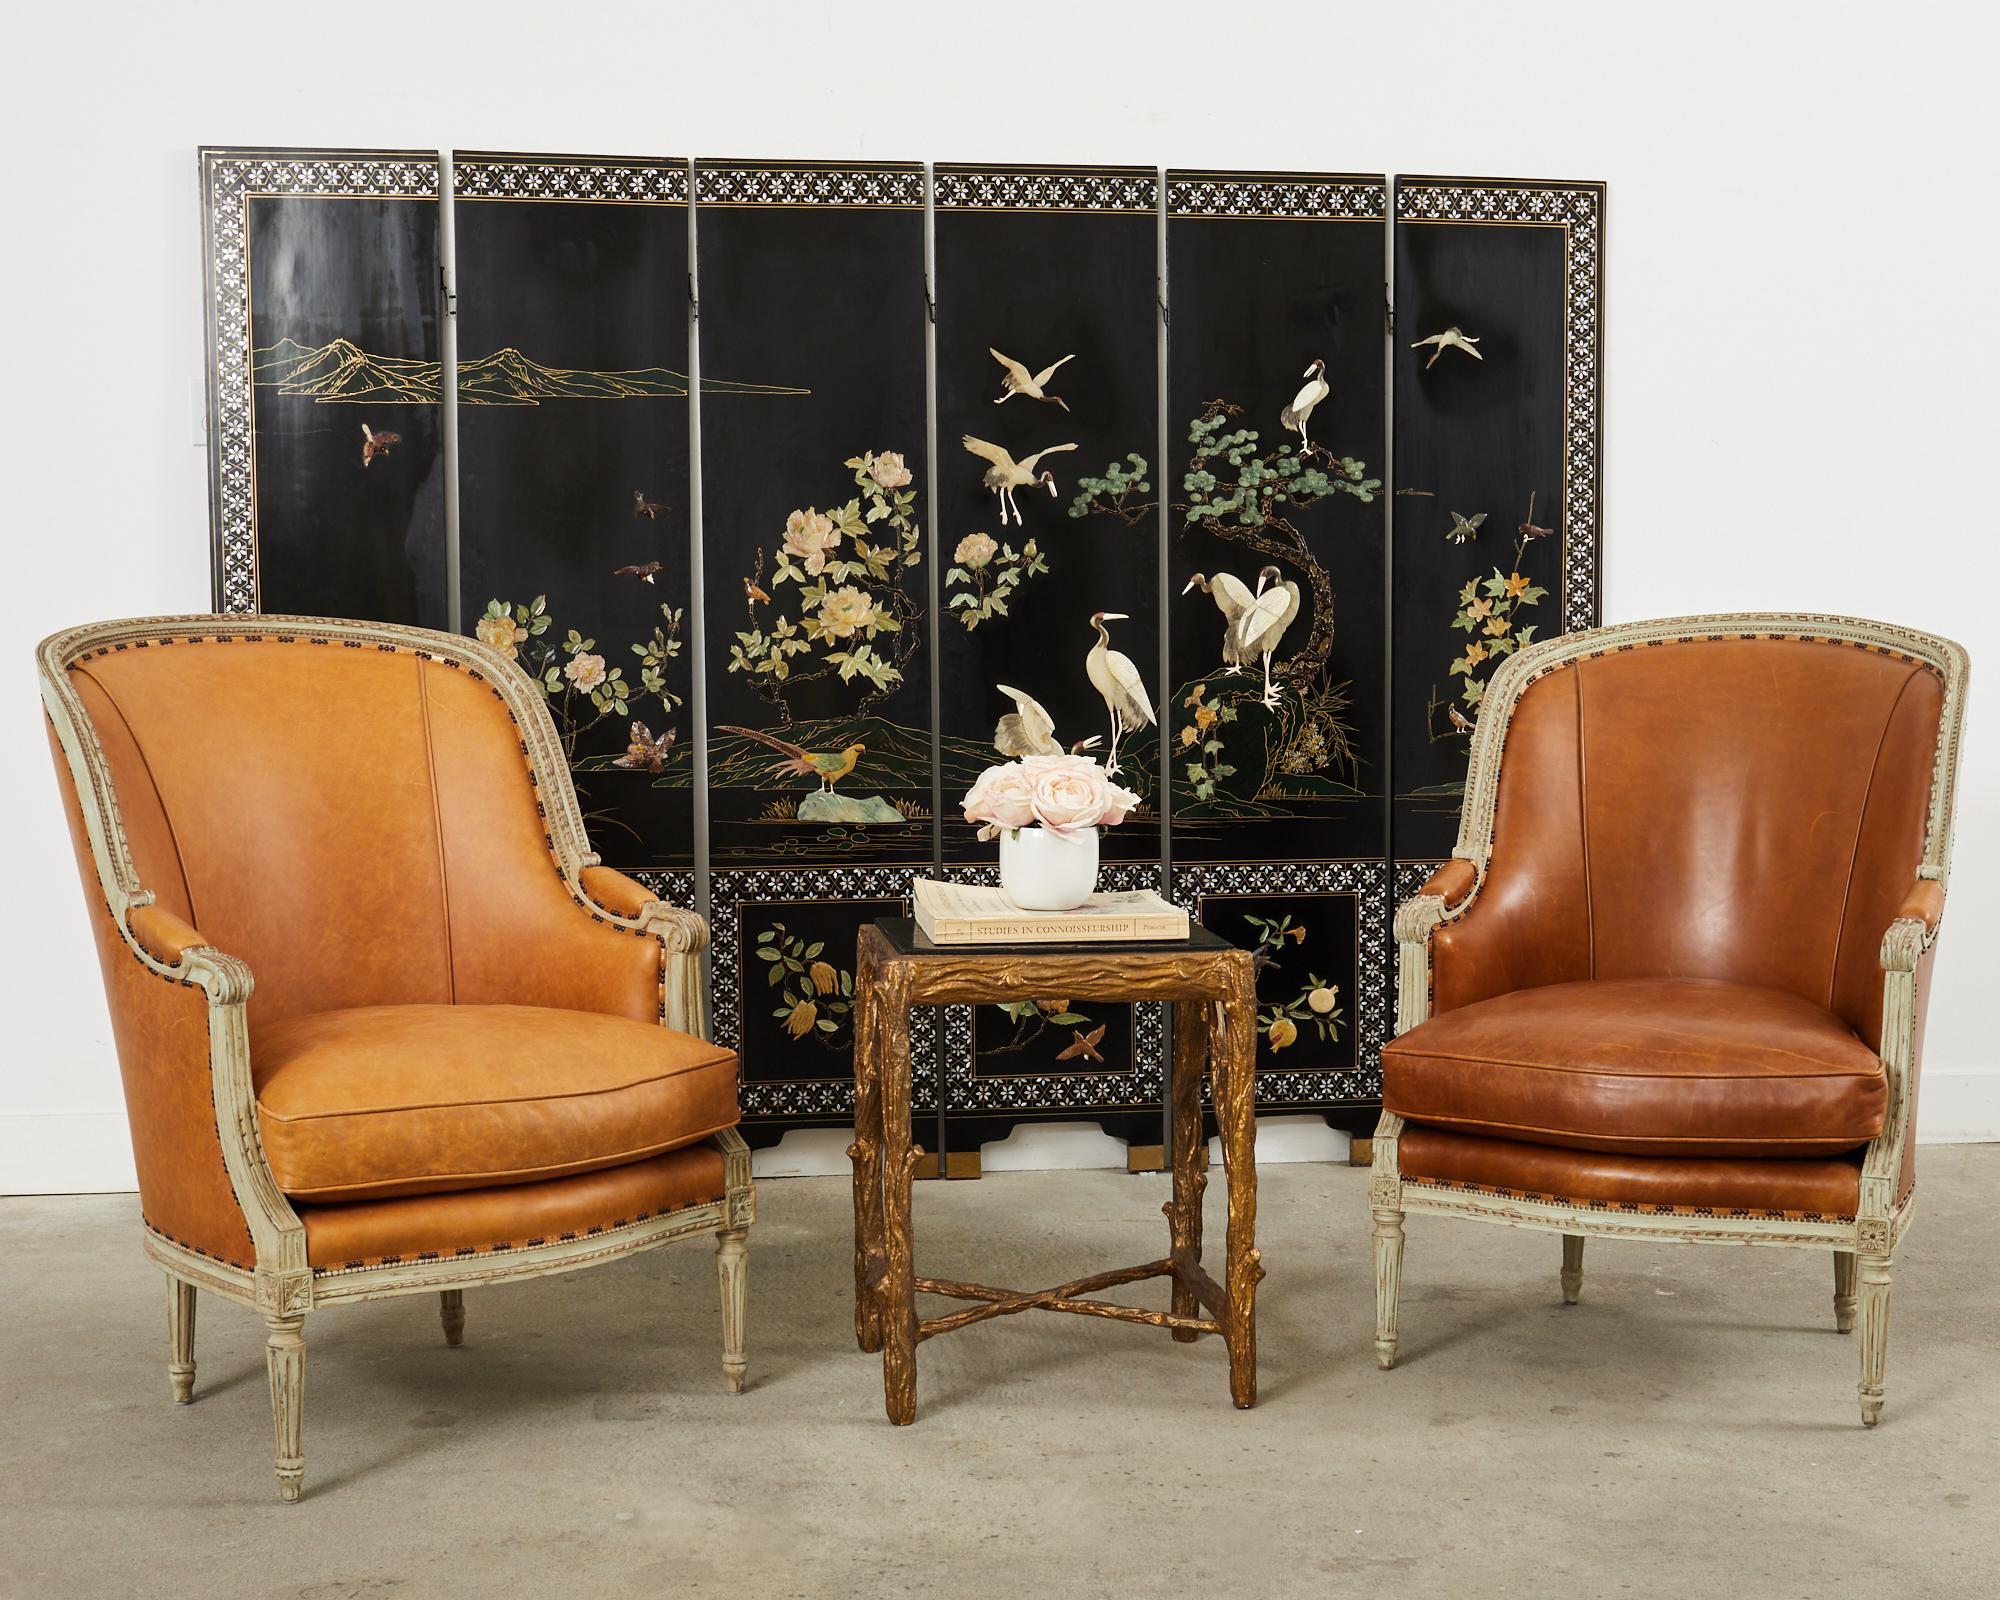 Amazing pair of lounge chairs or Bergere armchairs made in the grand neoclassical Louis XVI taste by Hendrix Allardyce Los Angeles, CA. The chairs feature a carved frame with an intentionally, aged distressed patina on the painted finish. Made in a